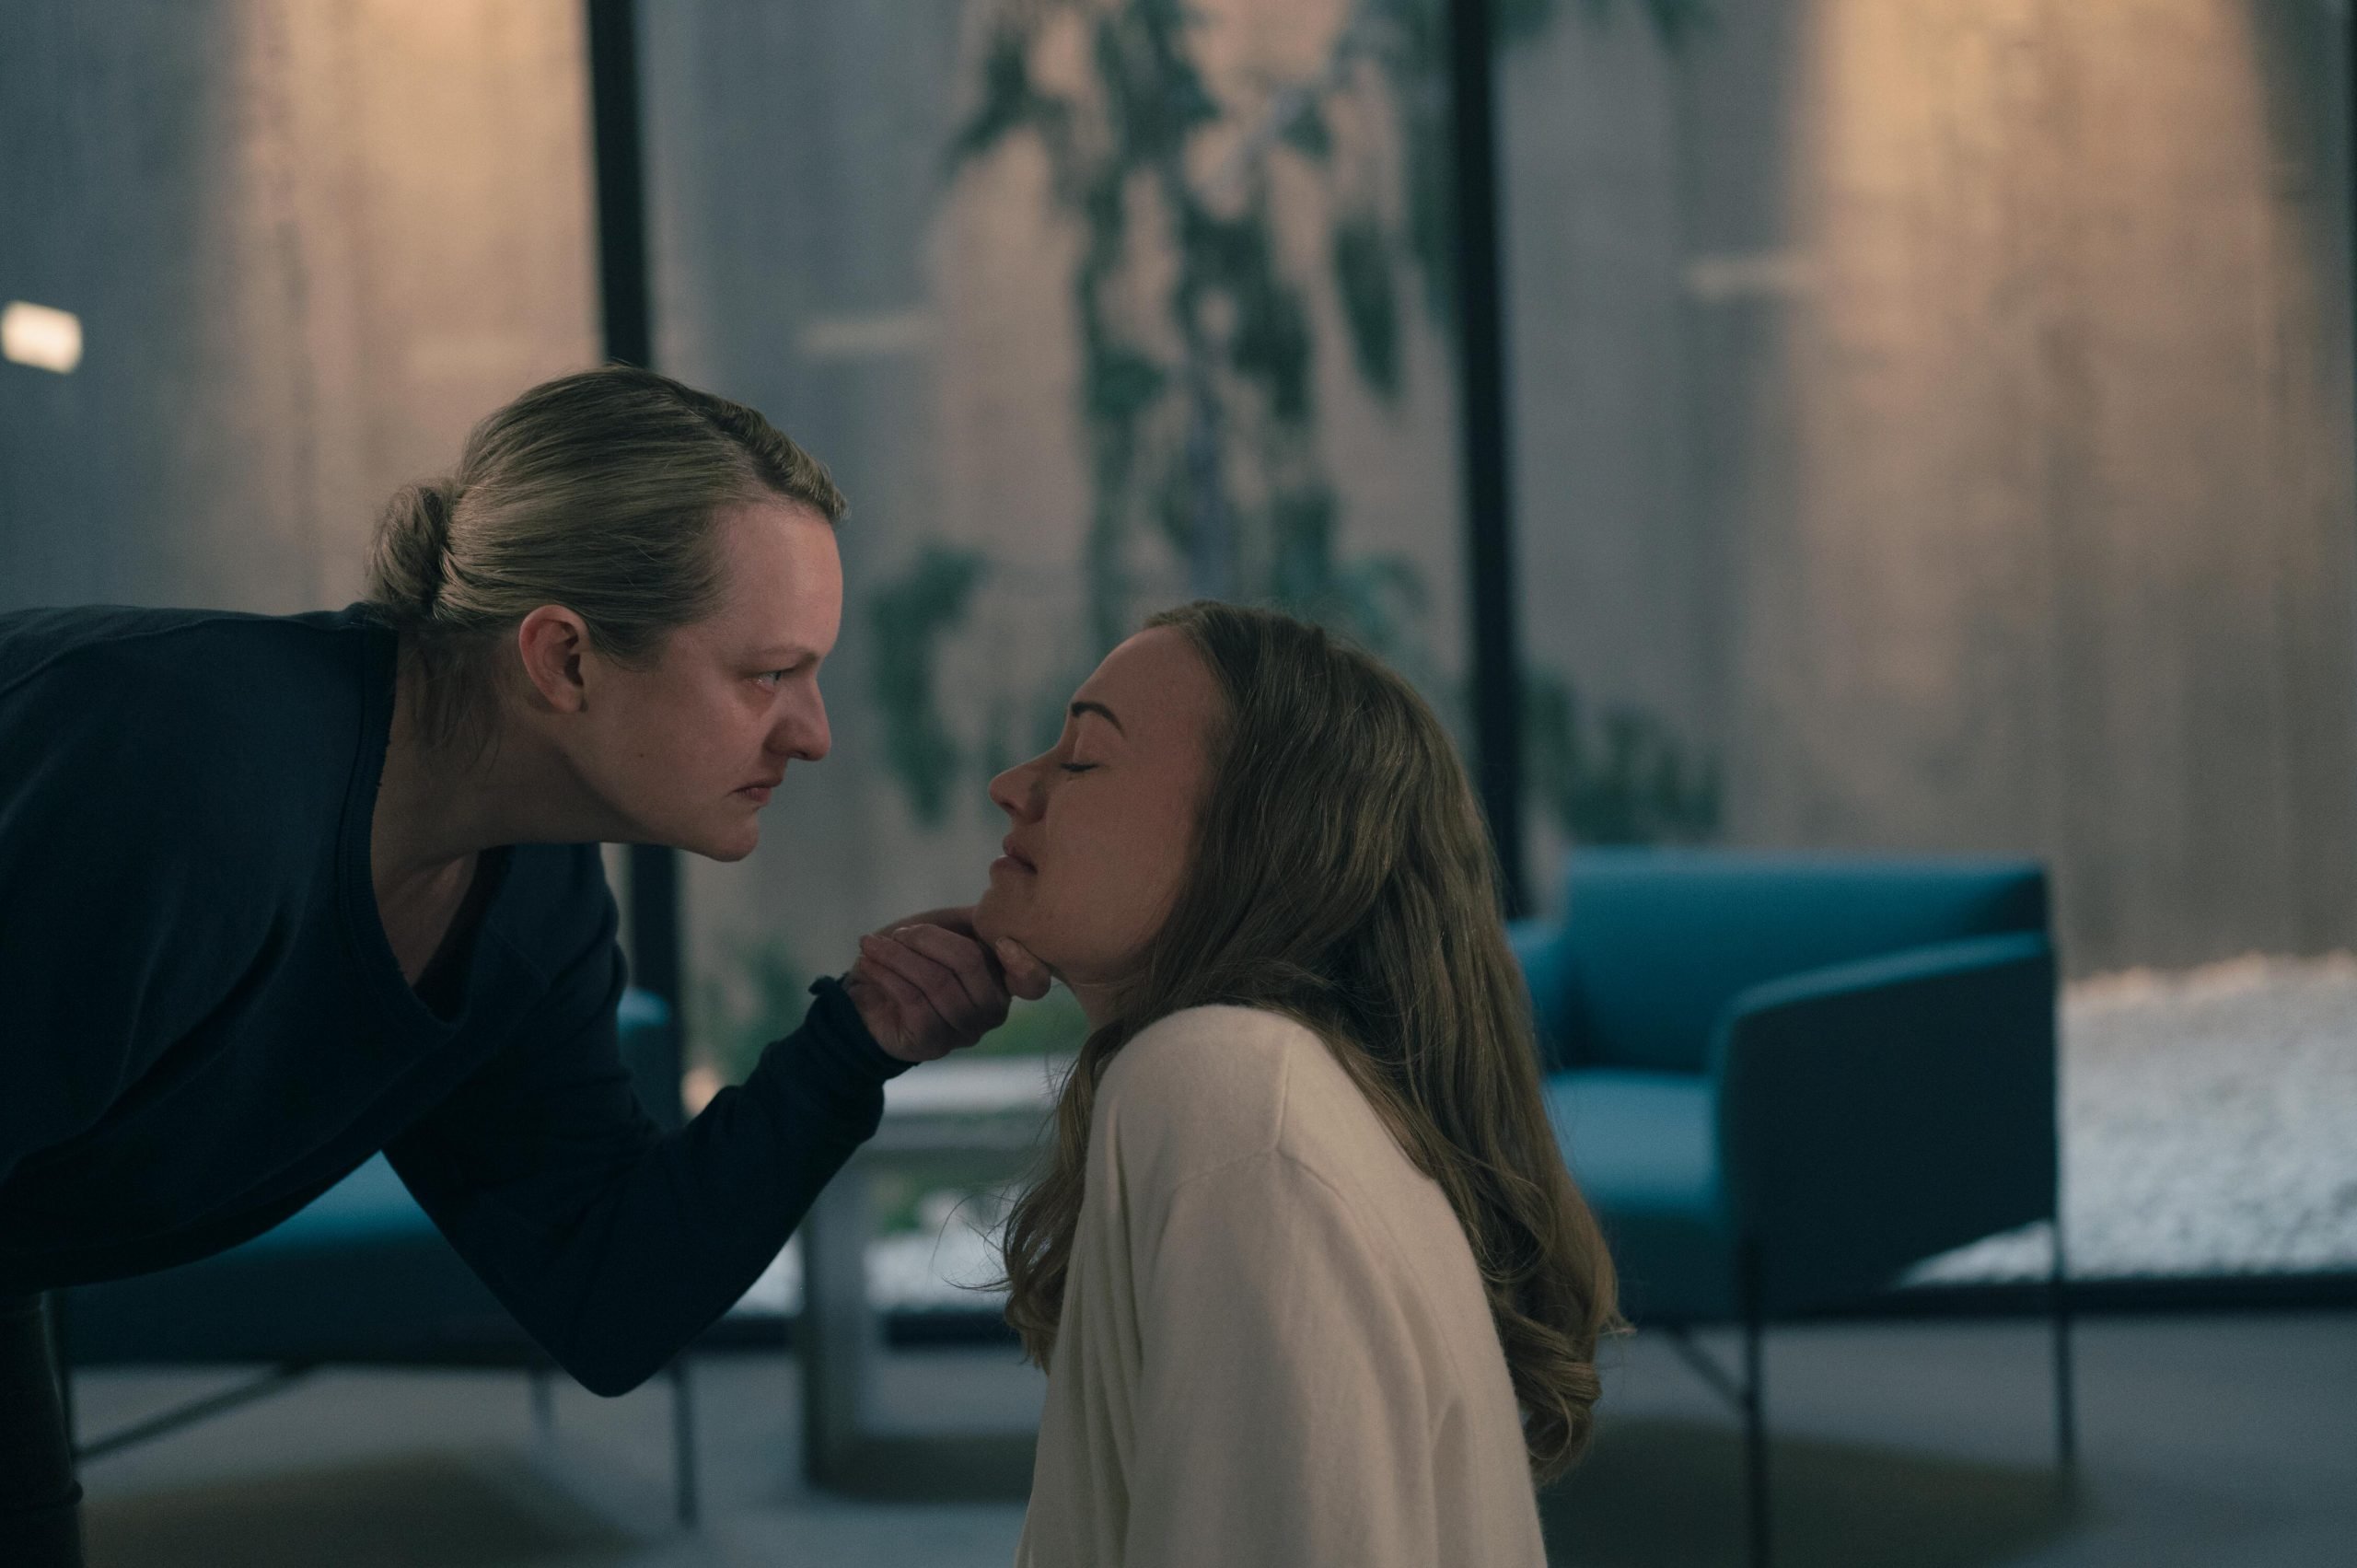 June holds Serena Joy's face in season 4 of 'The Handmaid's Tale'